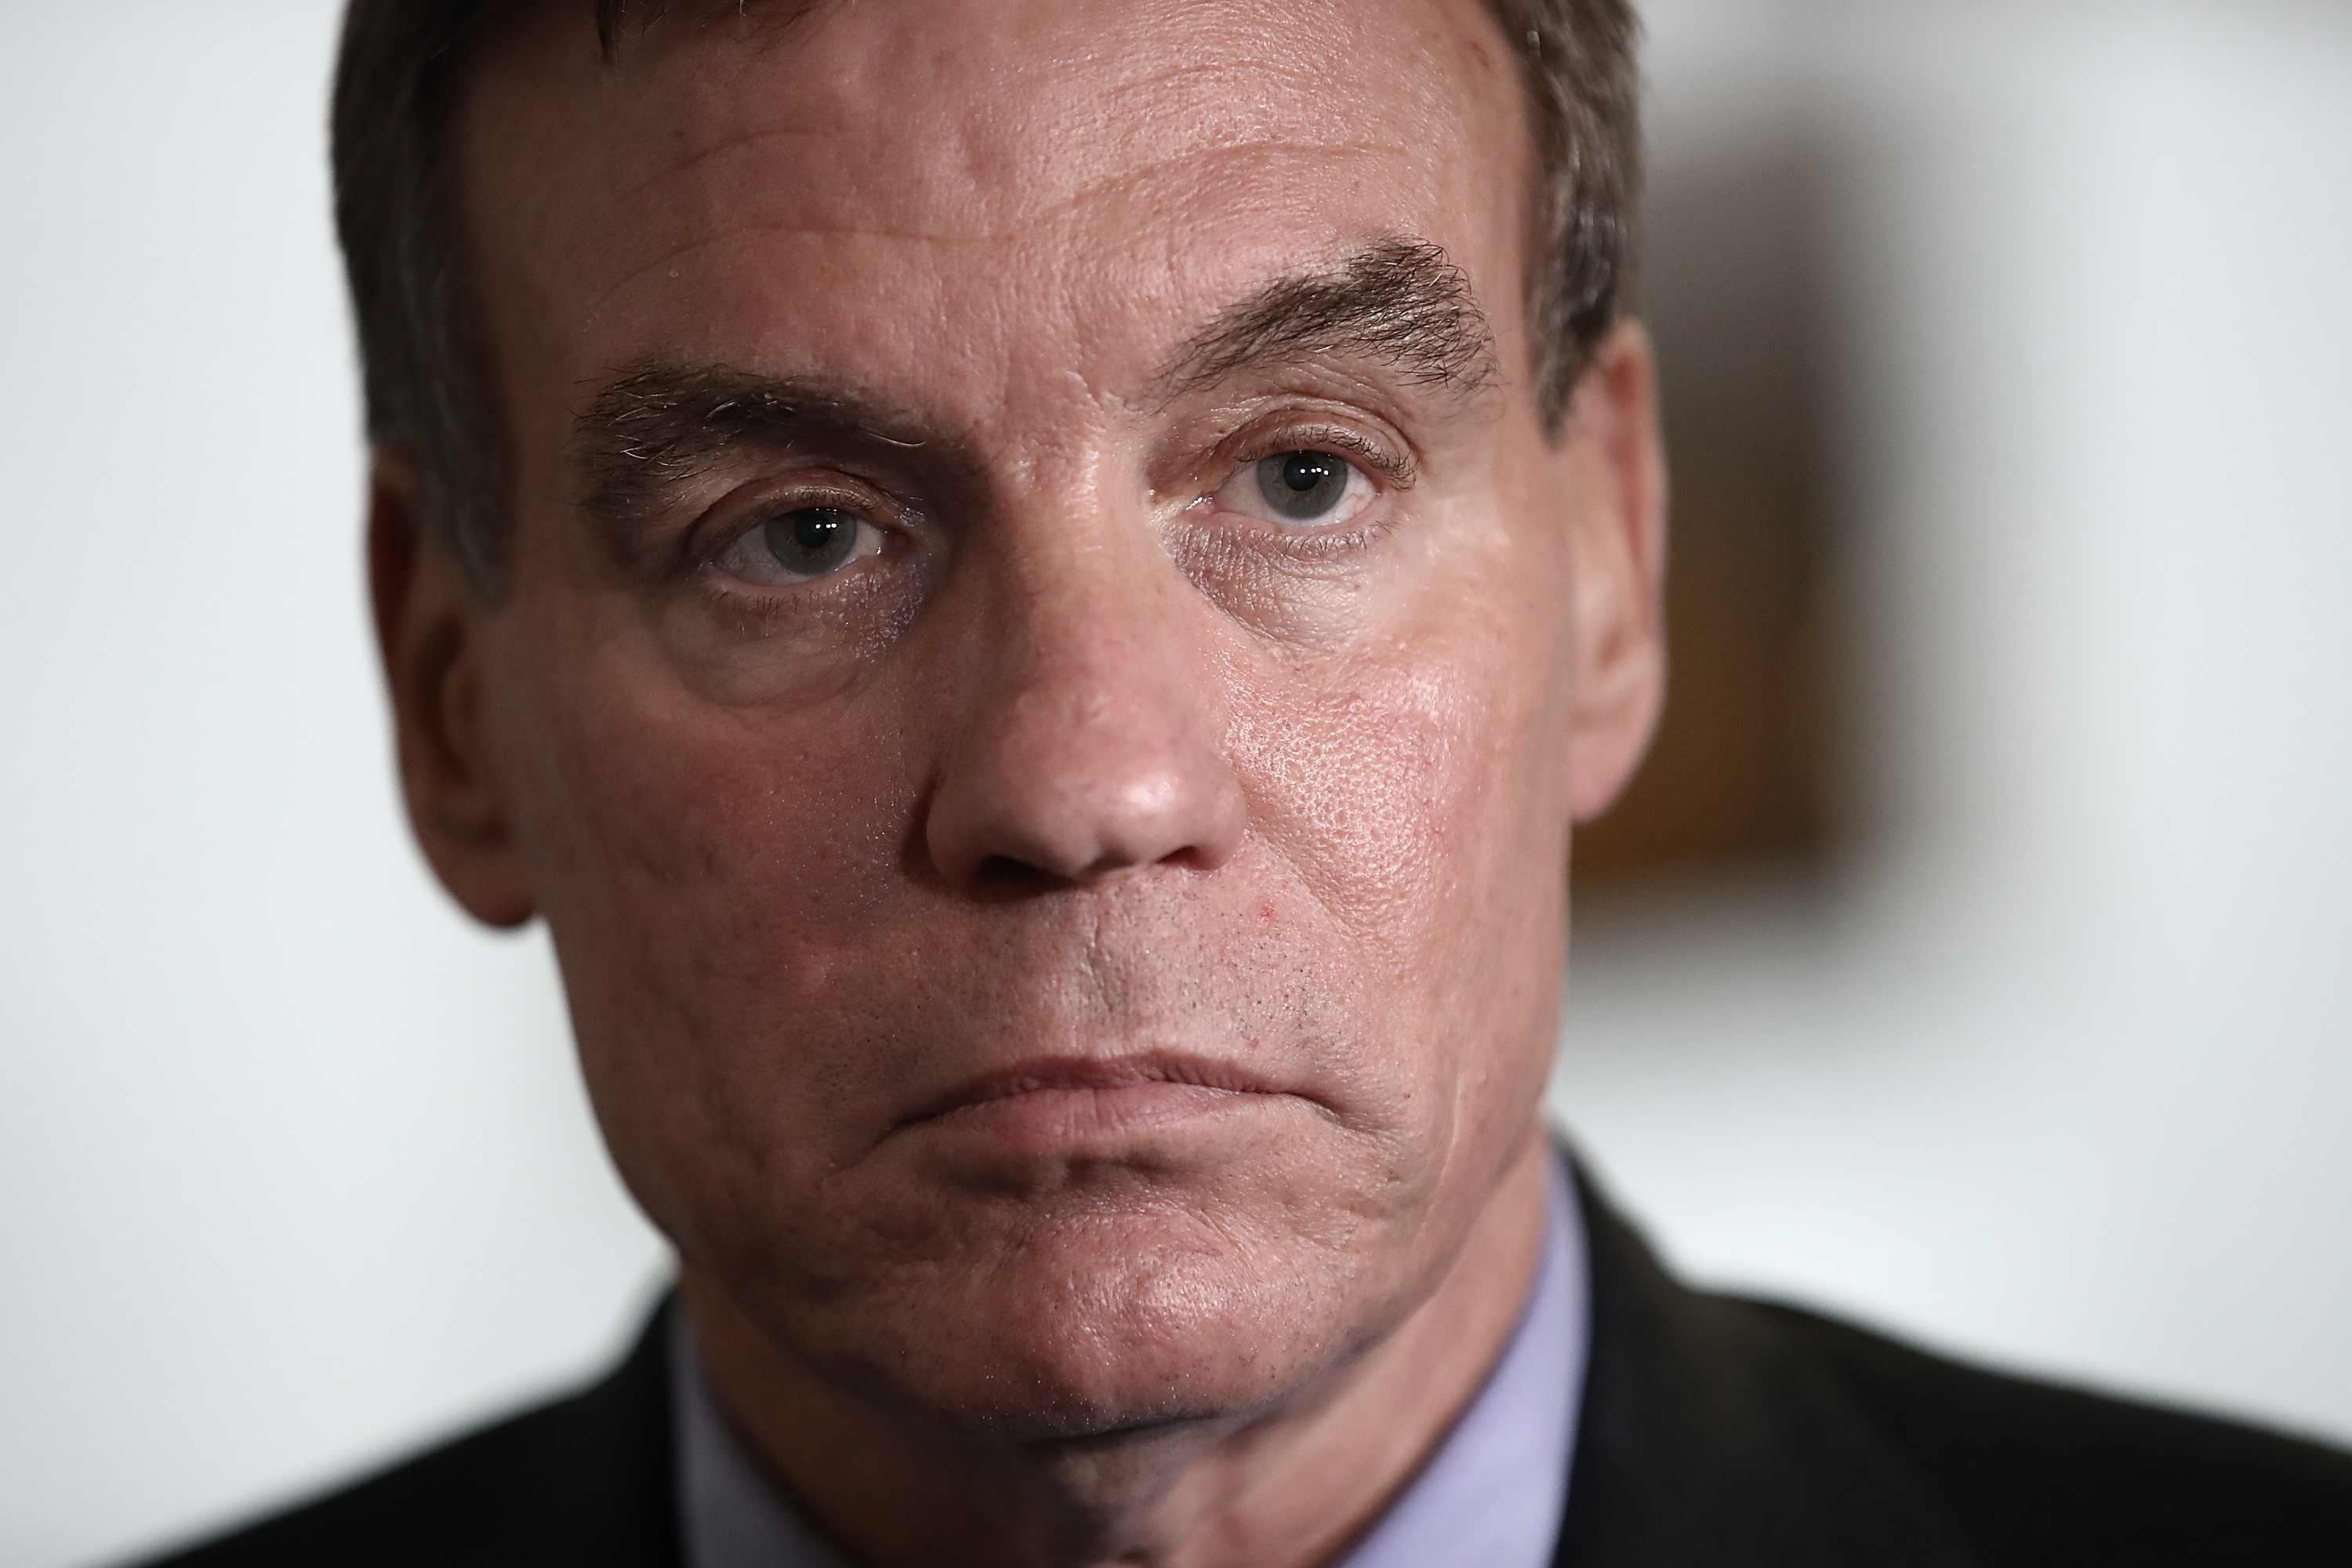 Senate Select Committee on Intelligence ranking member Mark Warner (D-VA) speaks to reporters after a meeting of the committee on Capitol Hill May 23, 2017 in Washington, DC. (Win McNamee—Getty Images)